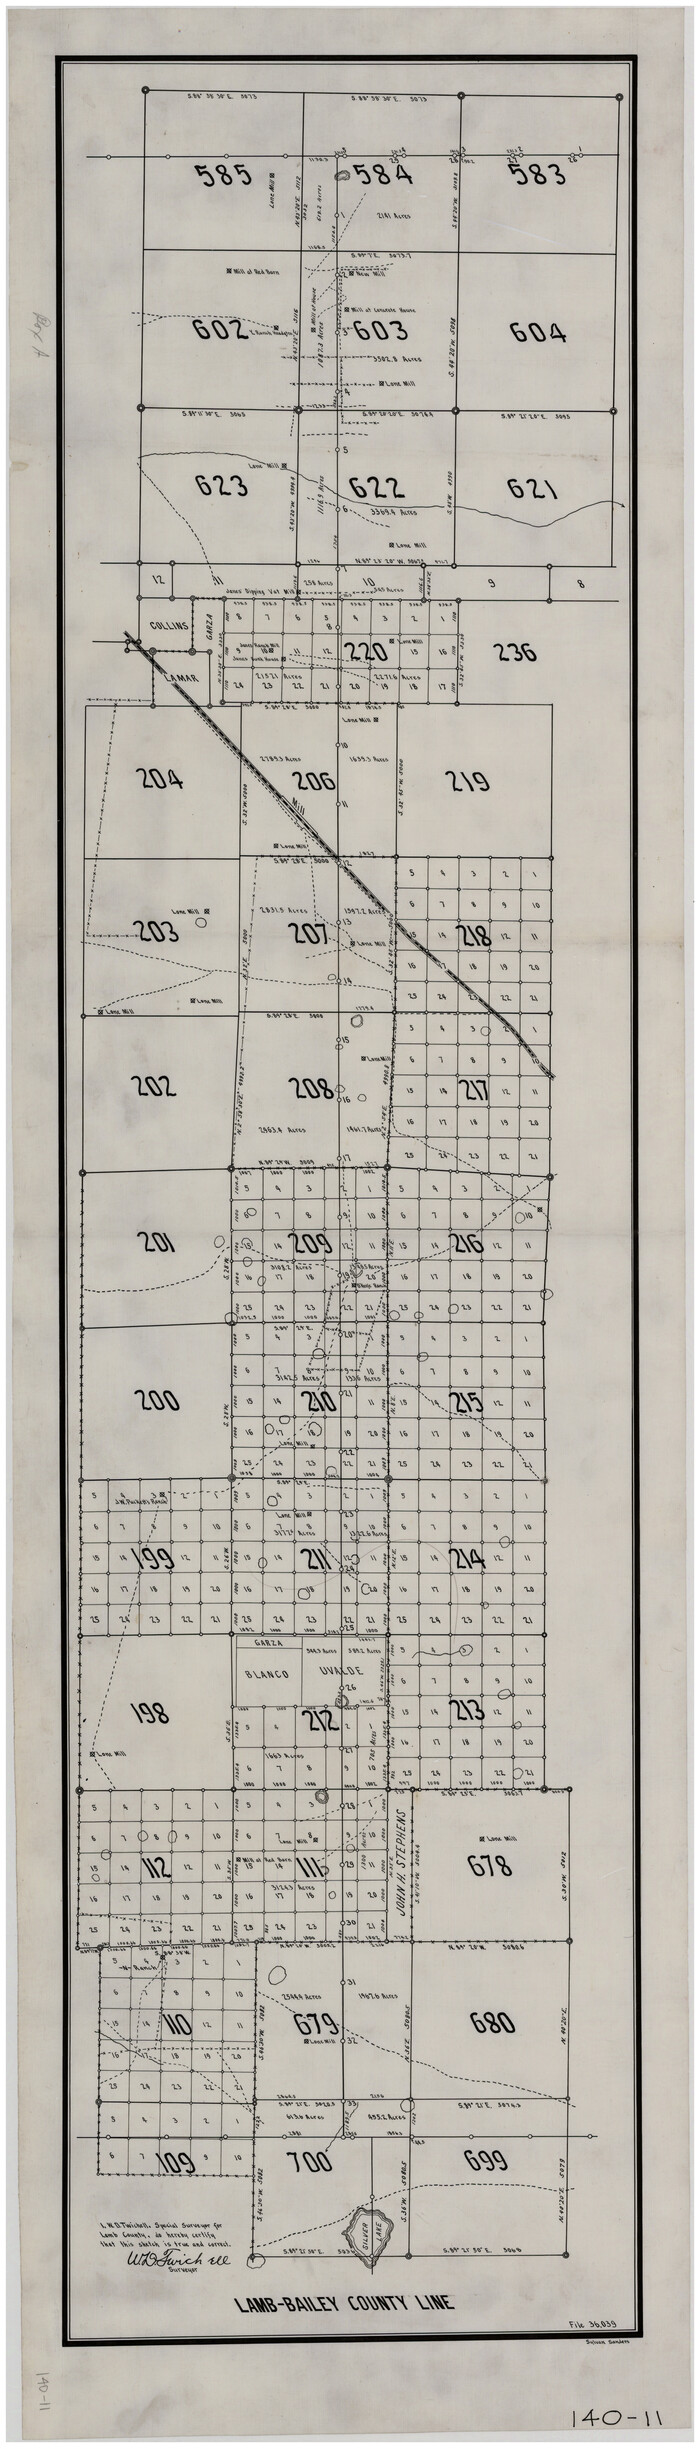 89636, Lamb-Bailey County Line, Twichell Survey Records